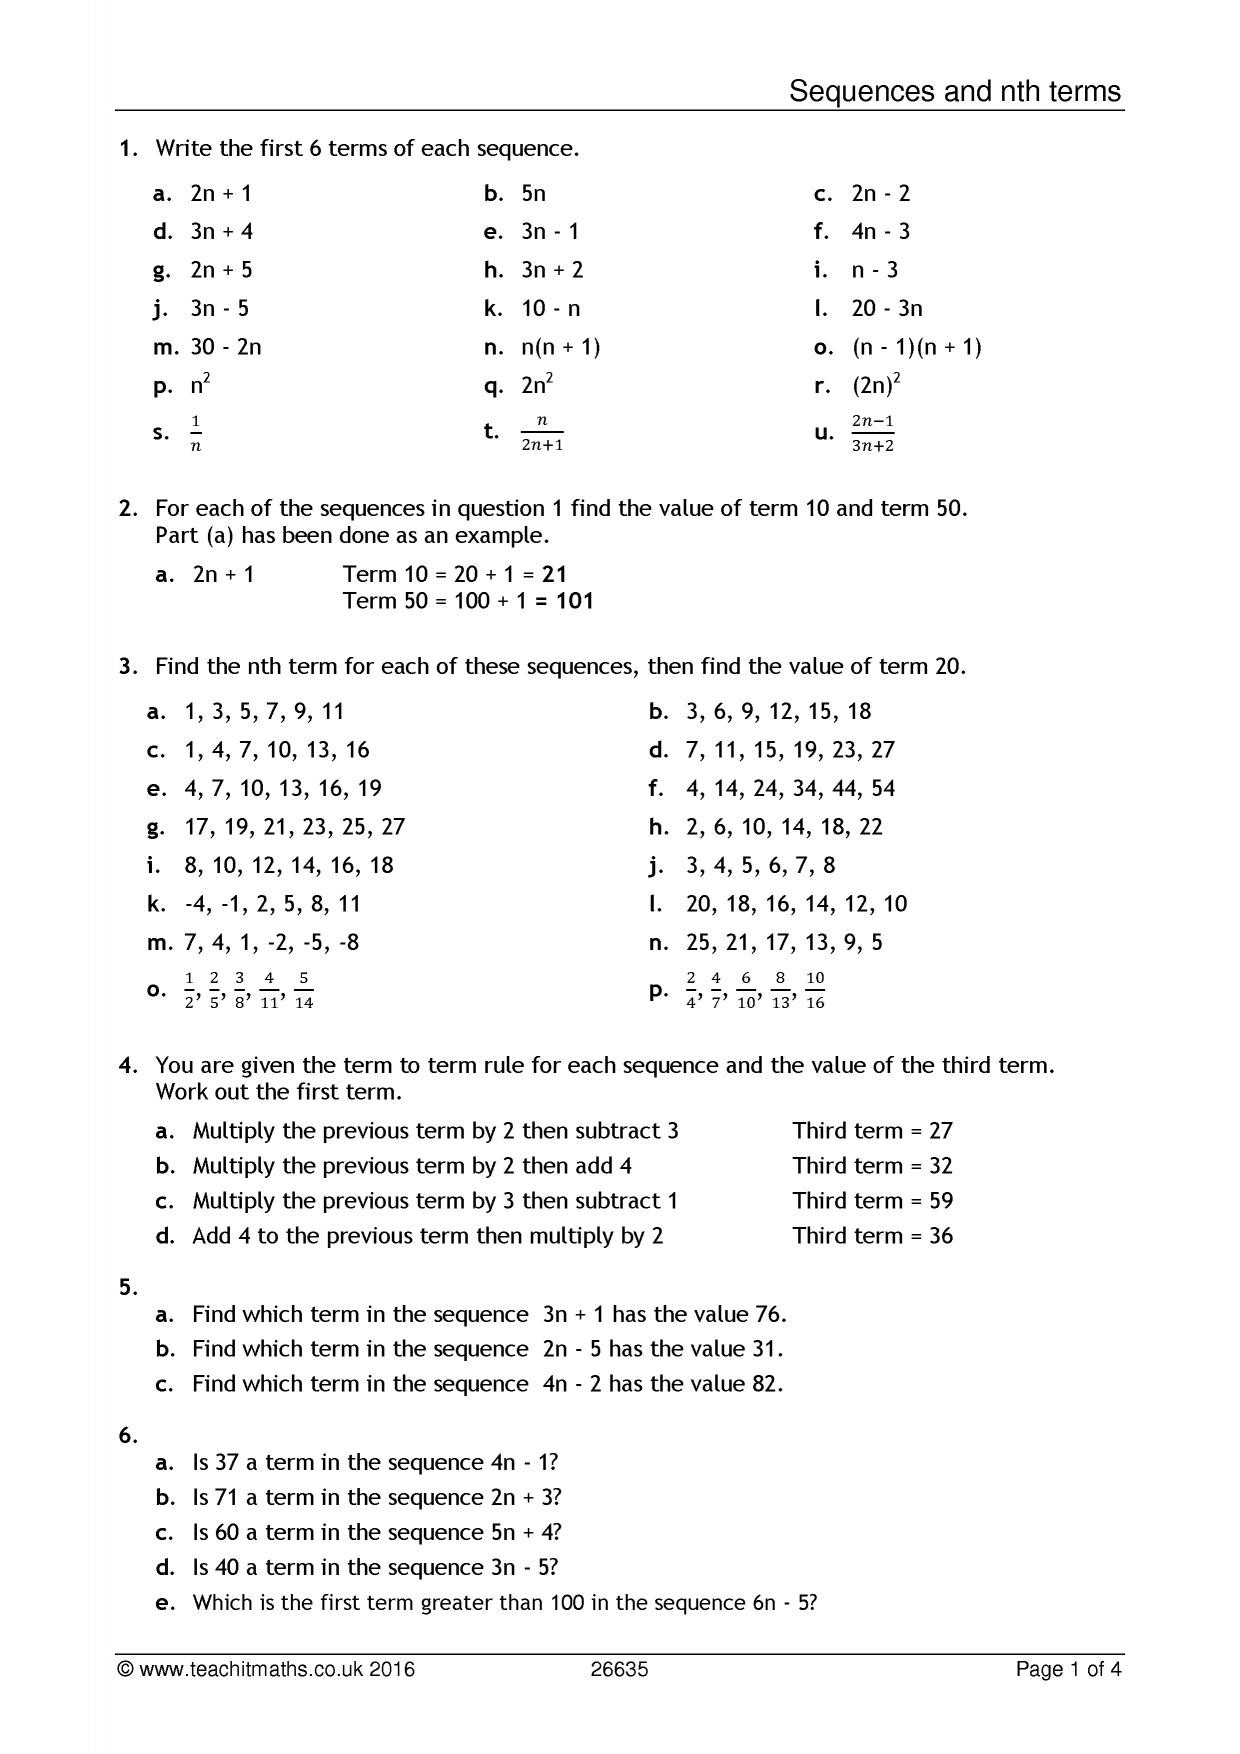 Arithmetic Sequence Worksheet Algebra 1 Sequences and Nth Terms Worksheet [pdf] Teachit Maths